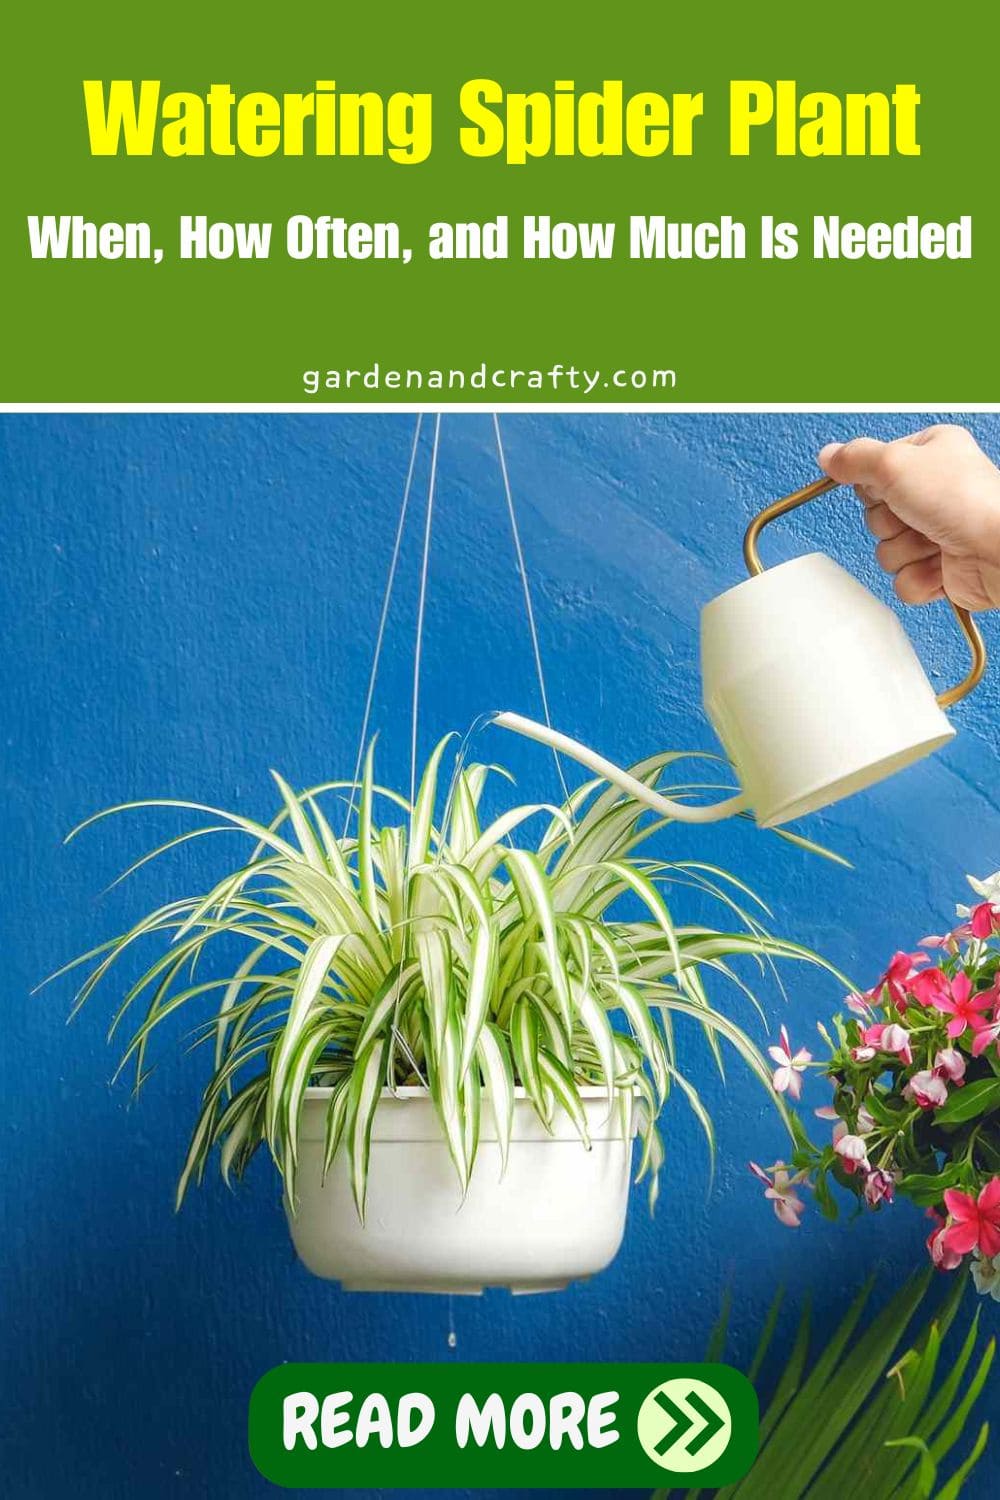 Watering Spider Plant: When, How Often, and How Much Is Needed